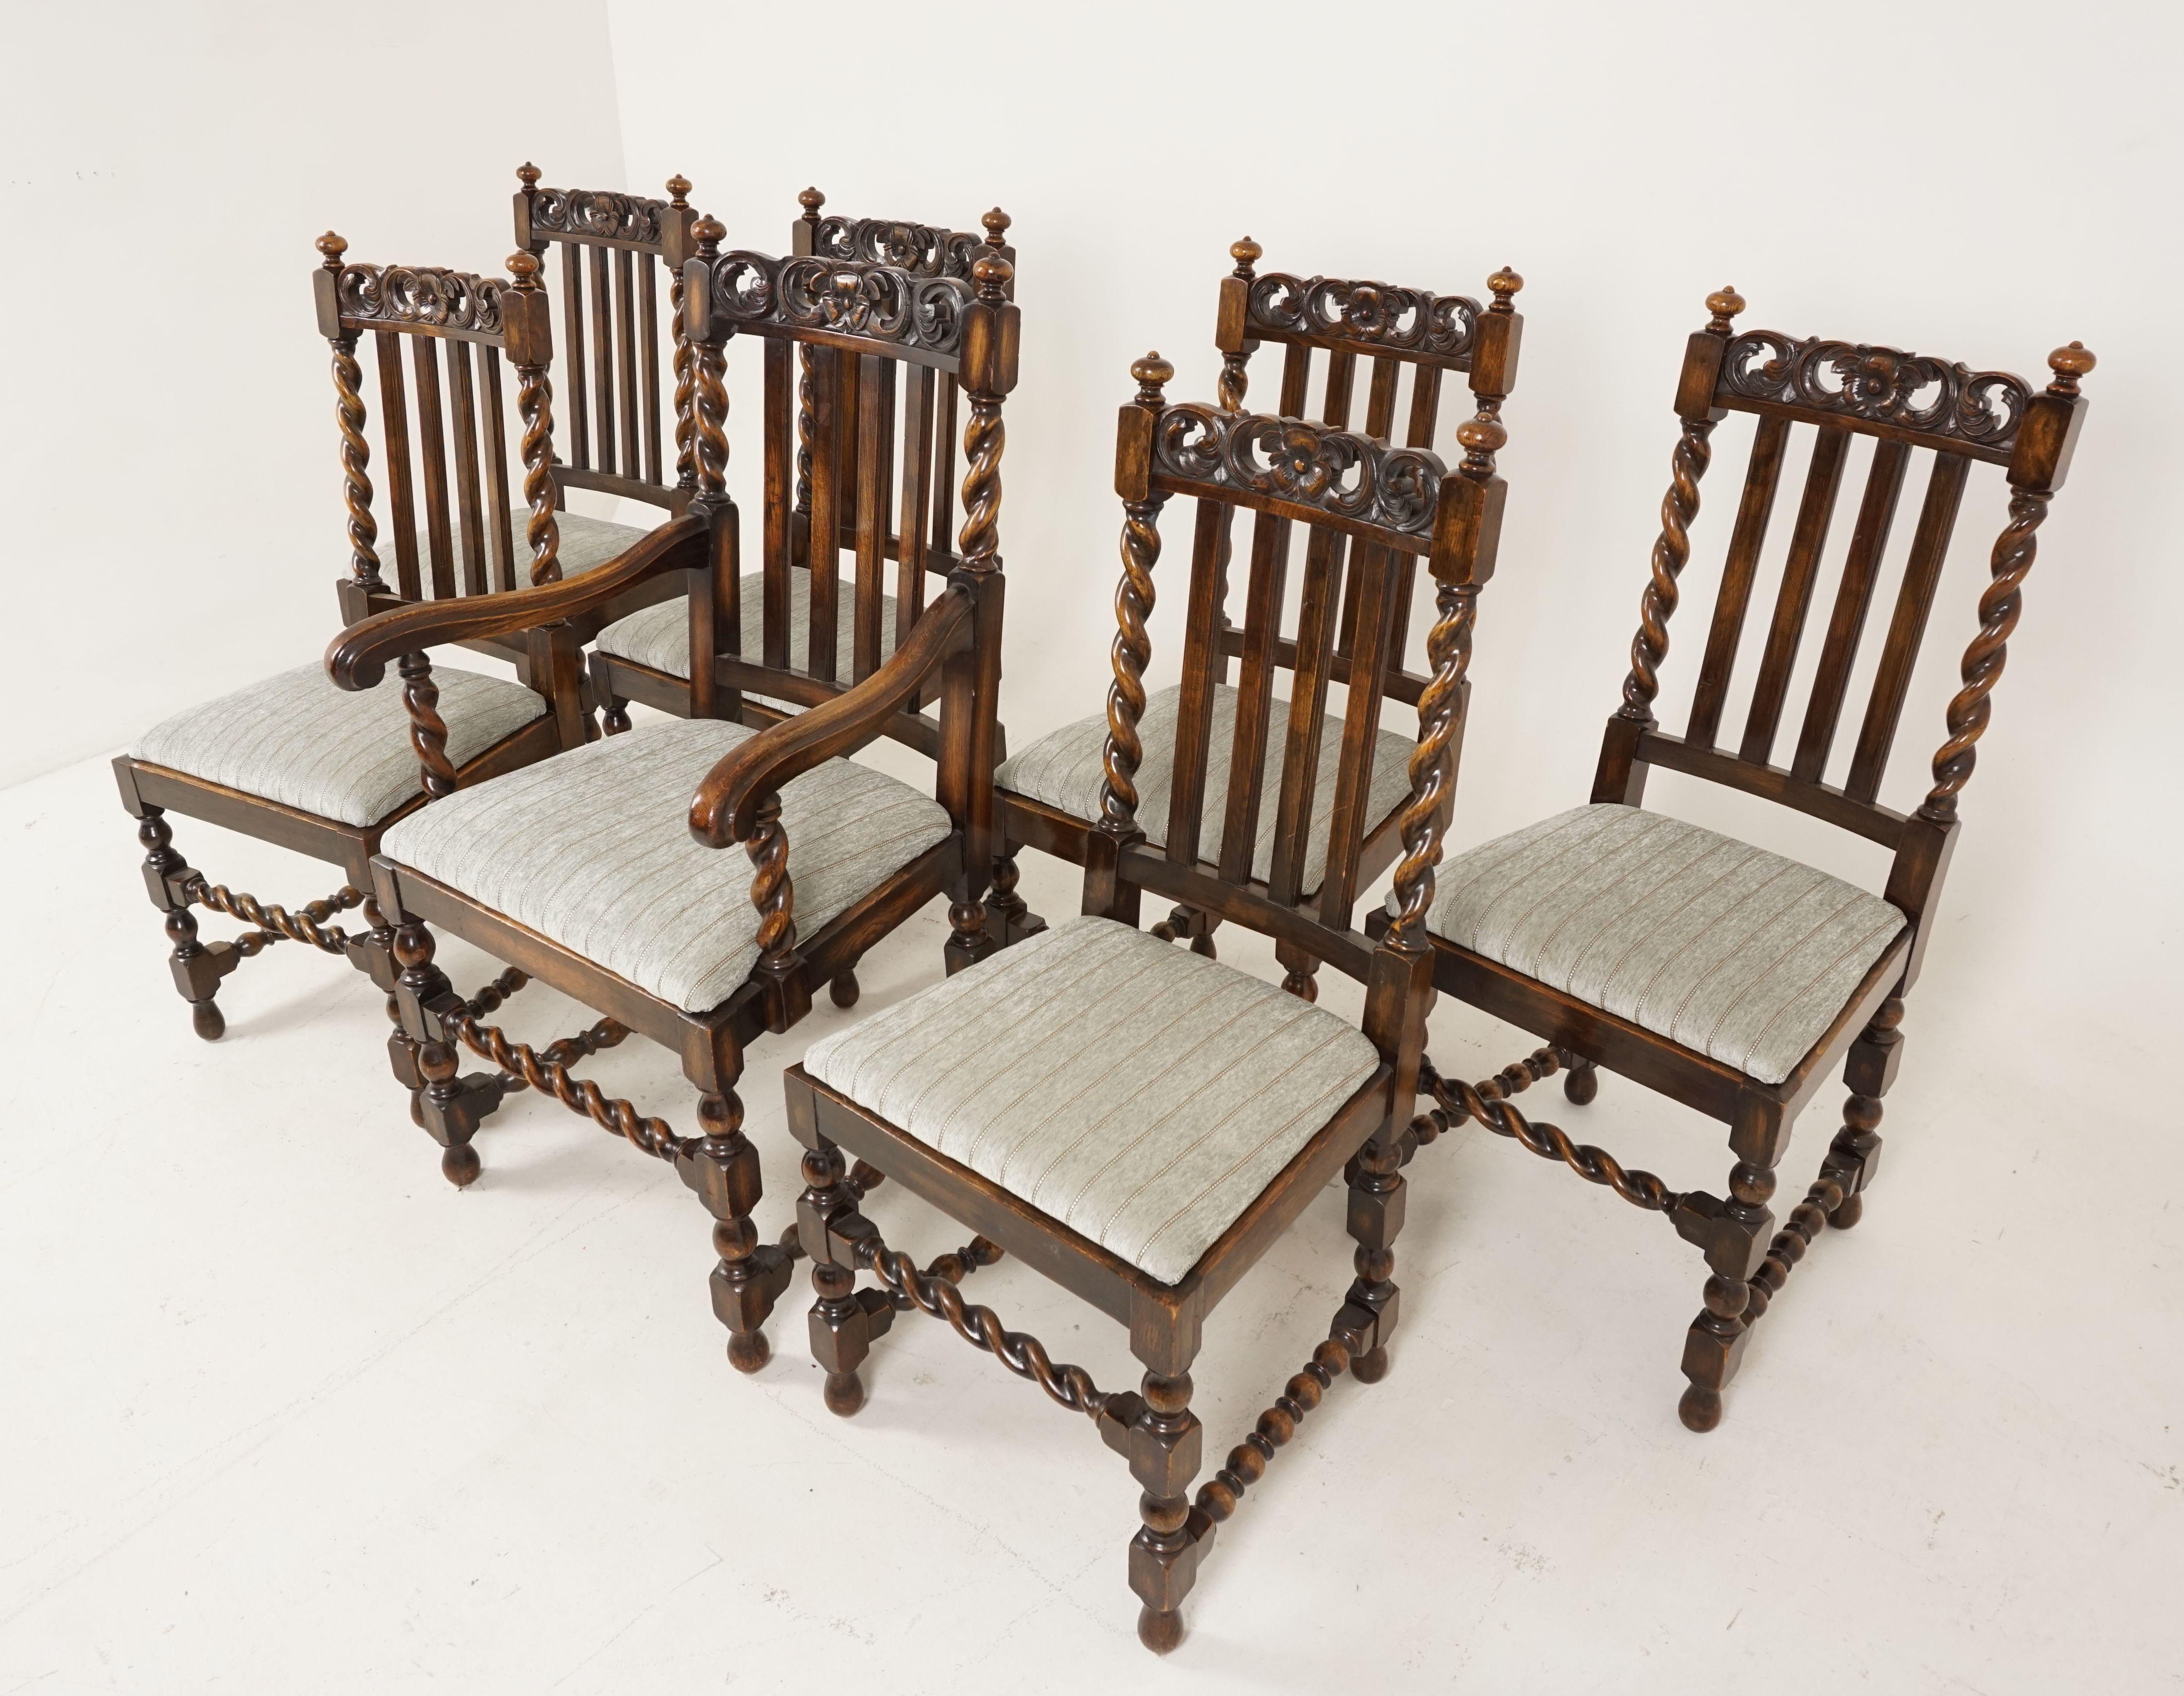 7 antique oak barley twist dining chairs, lift out seats, Scotland 1920, B2499.

Scotland, 1920
Solid oak
Original finish
Carved floral rail on top
Vertical slats in the center
Pair of barley twist supports on the ends with finials to the